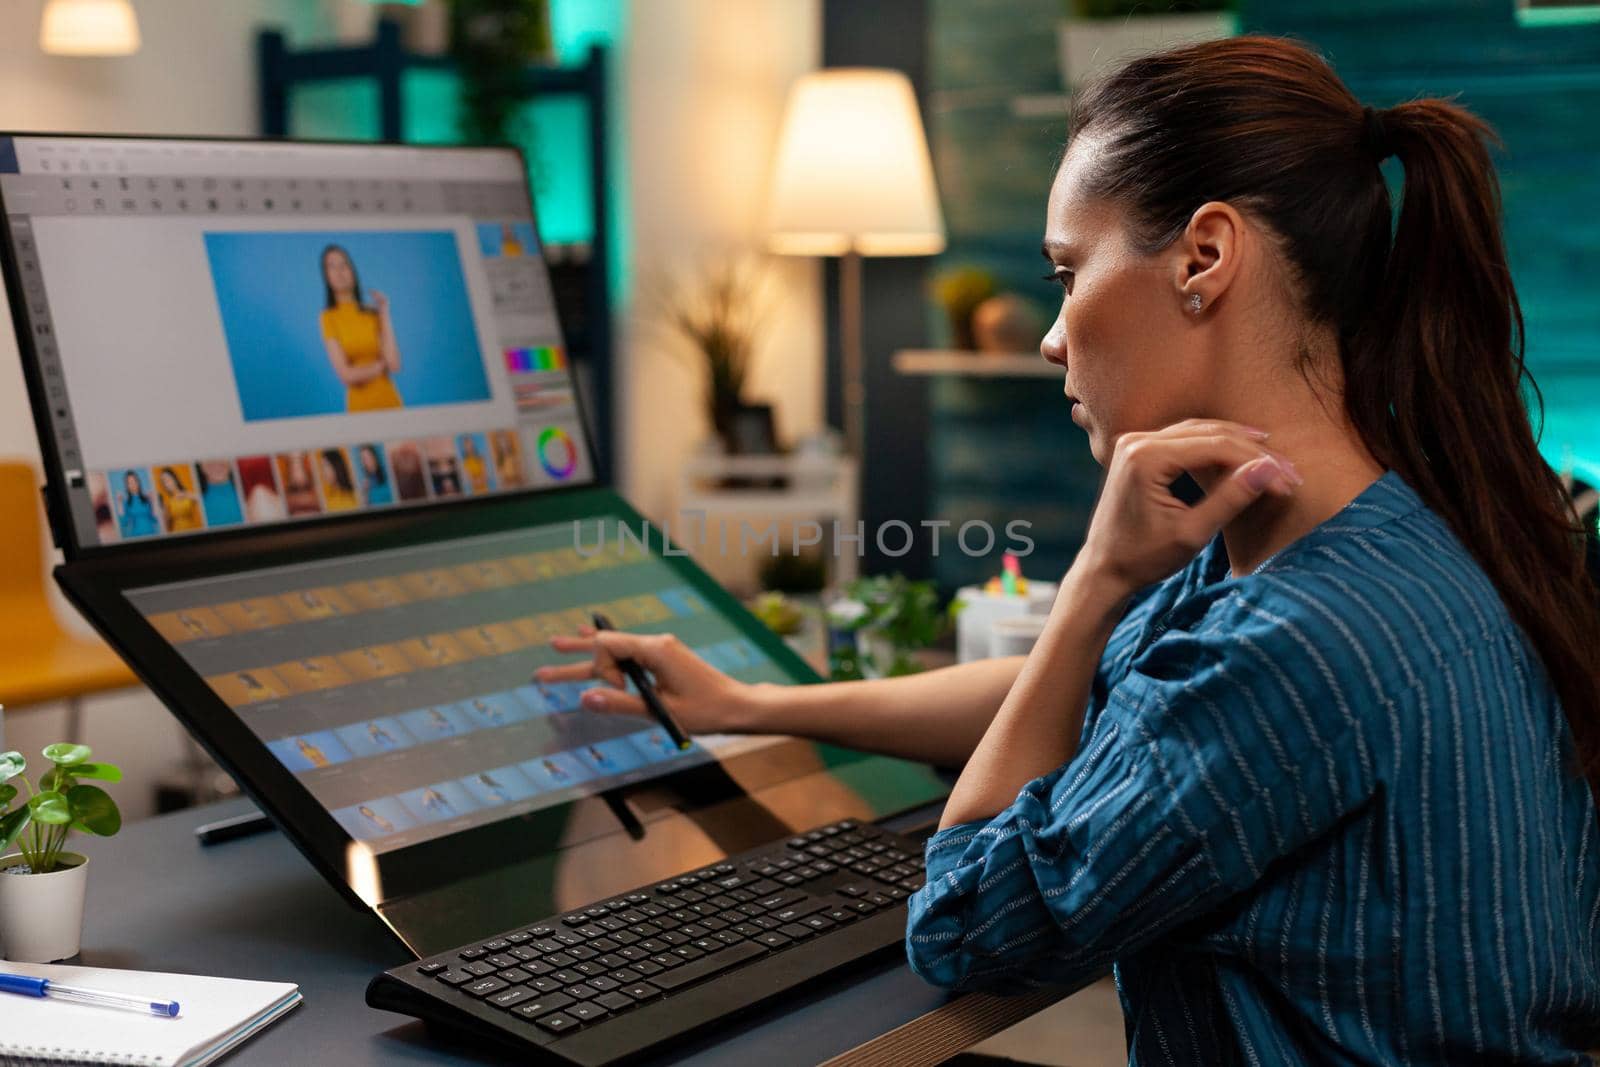 Studio editor doing retoucher work on touch screen computer monitor for occupation. Artist sitting at professional desk working with modern technology photography software and stylus